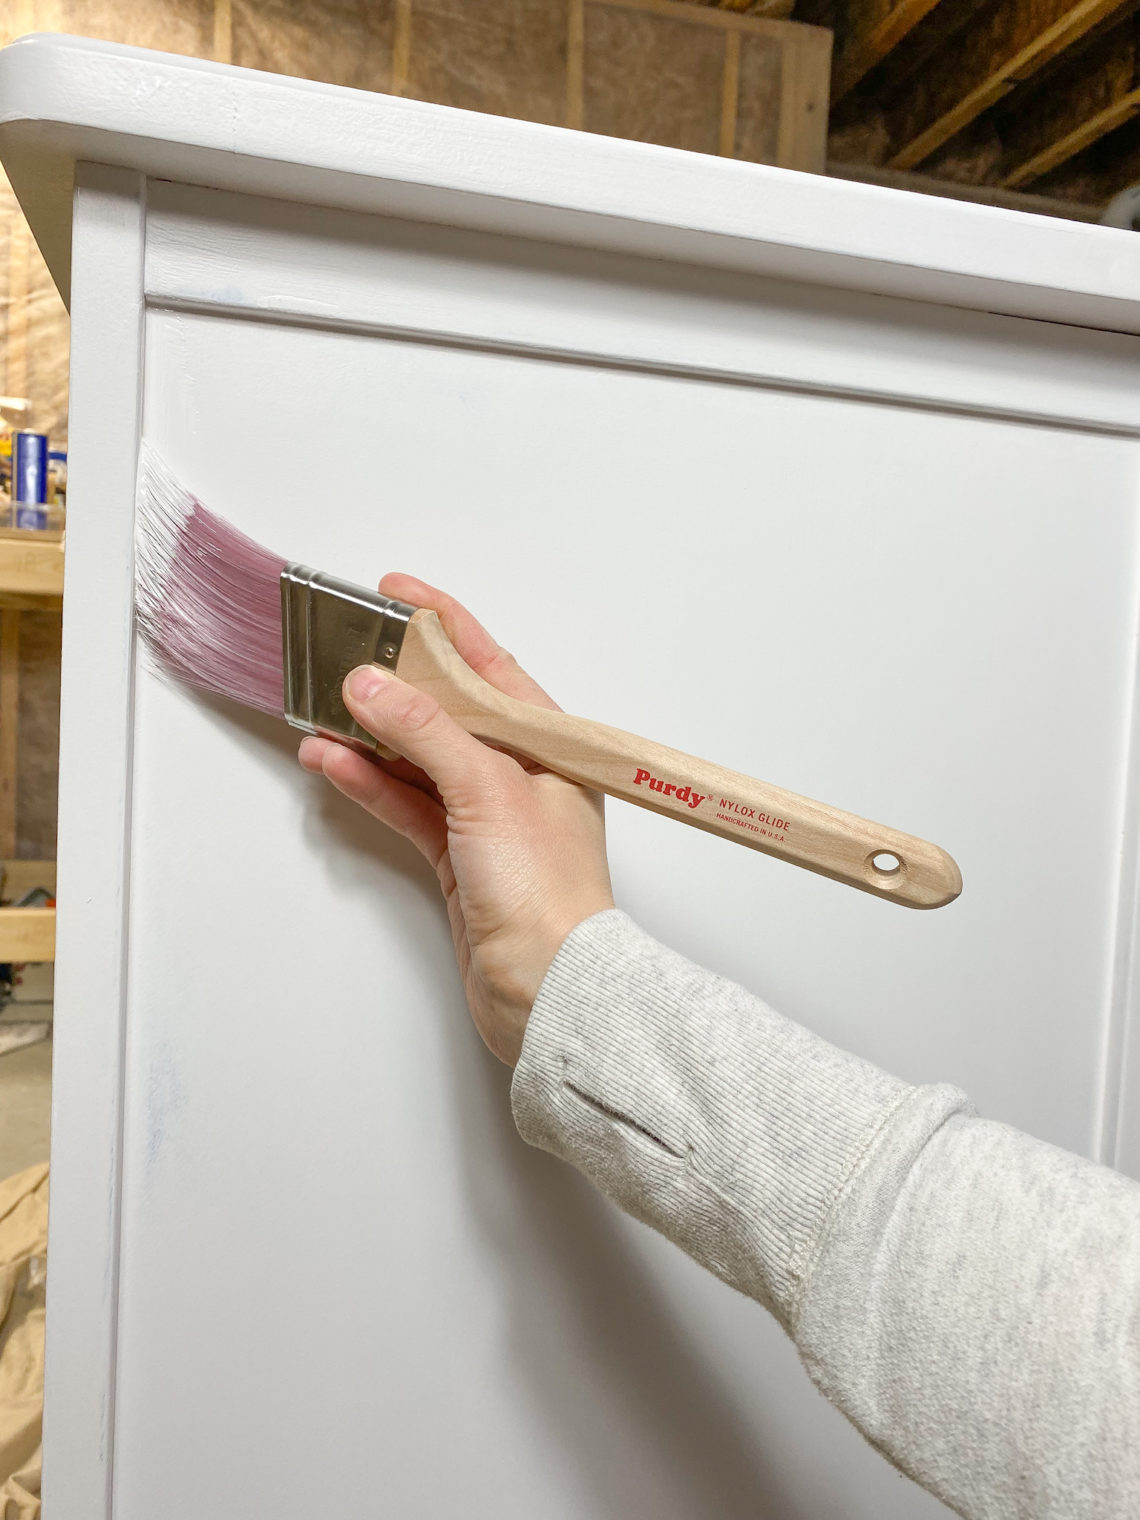 Choosing a Paintbrush for Interior Projects